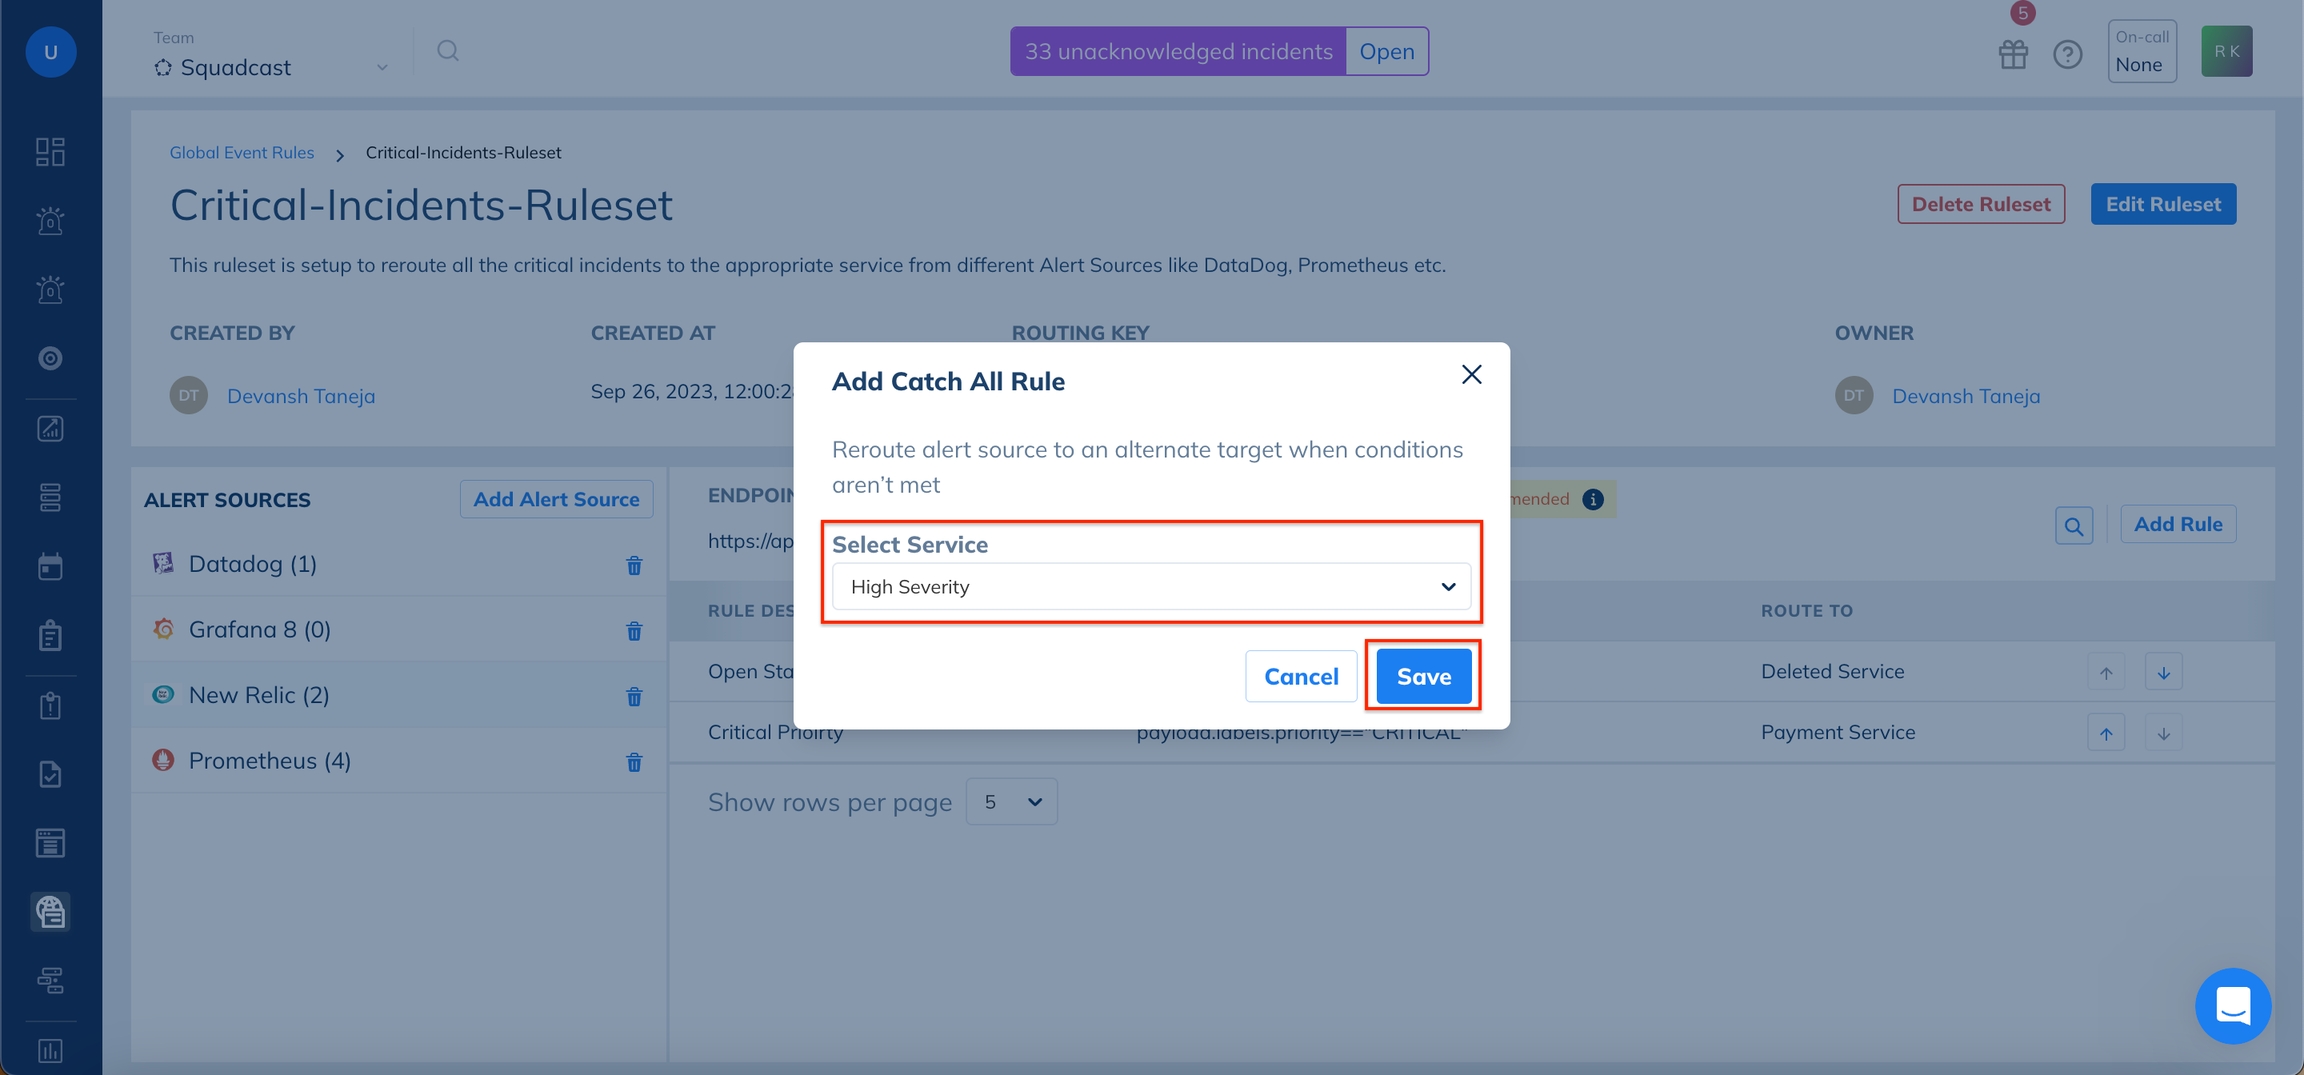 Add Catch All Rule for an Alert Source in Squadcast for Incident Management